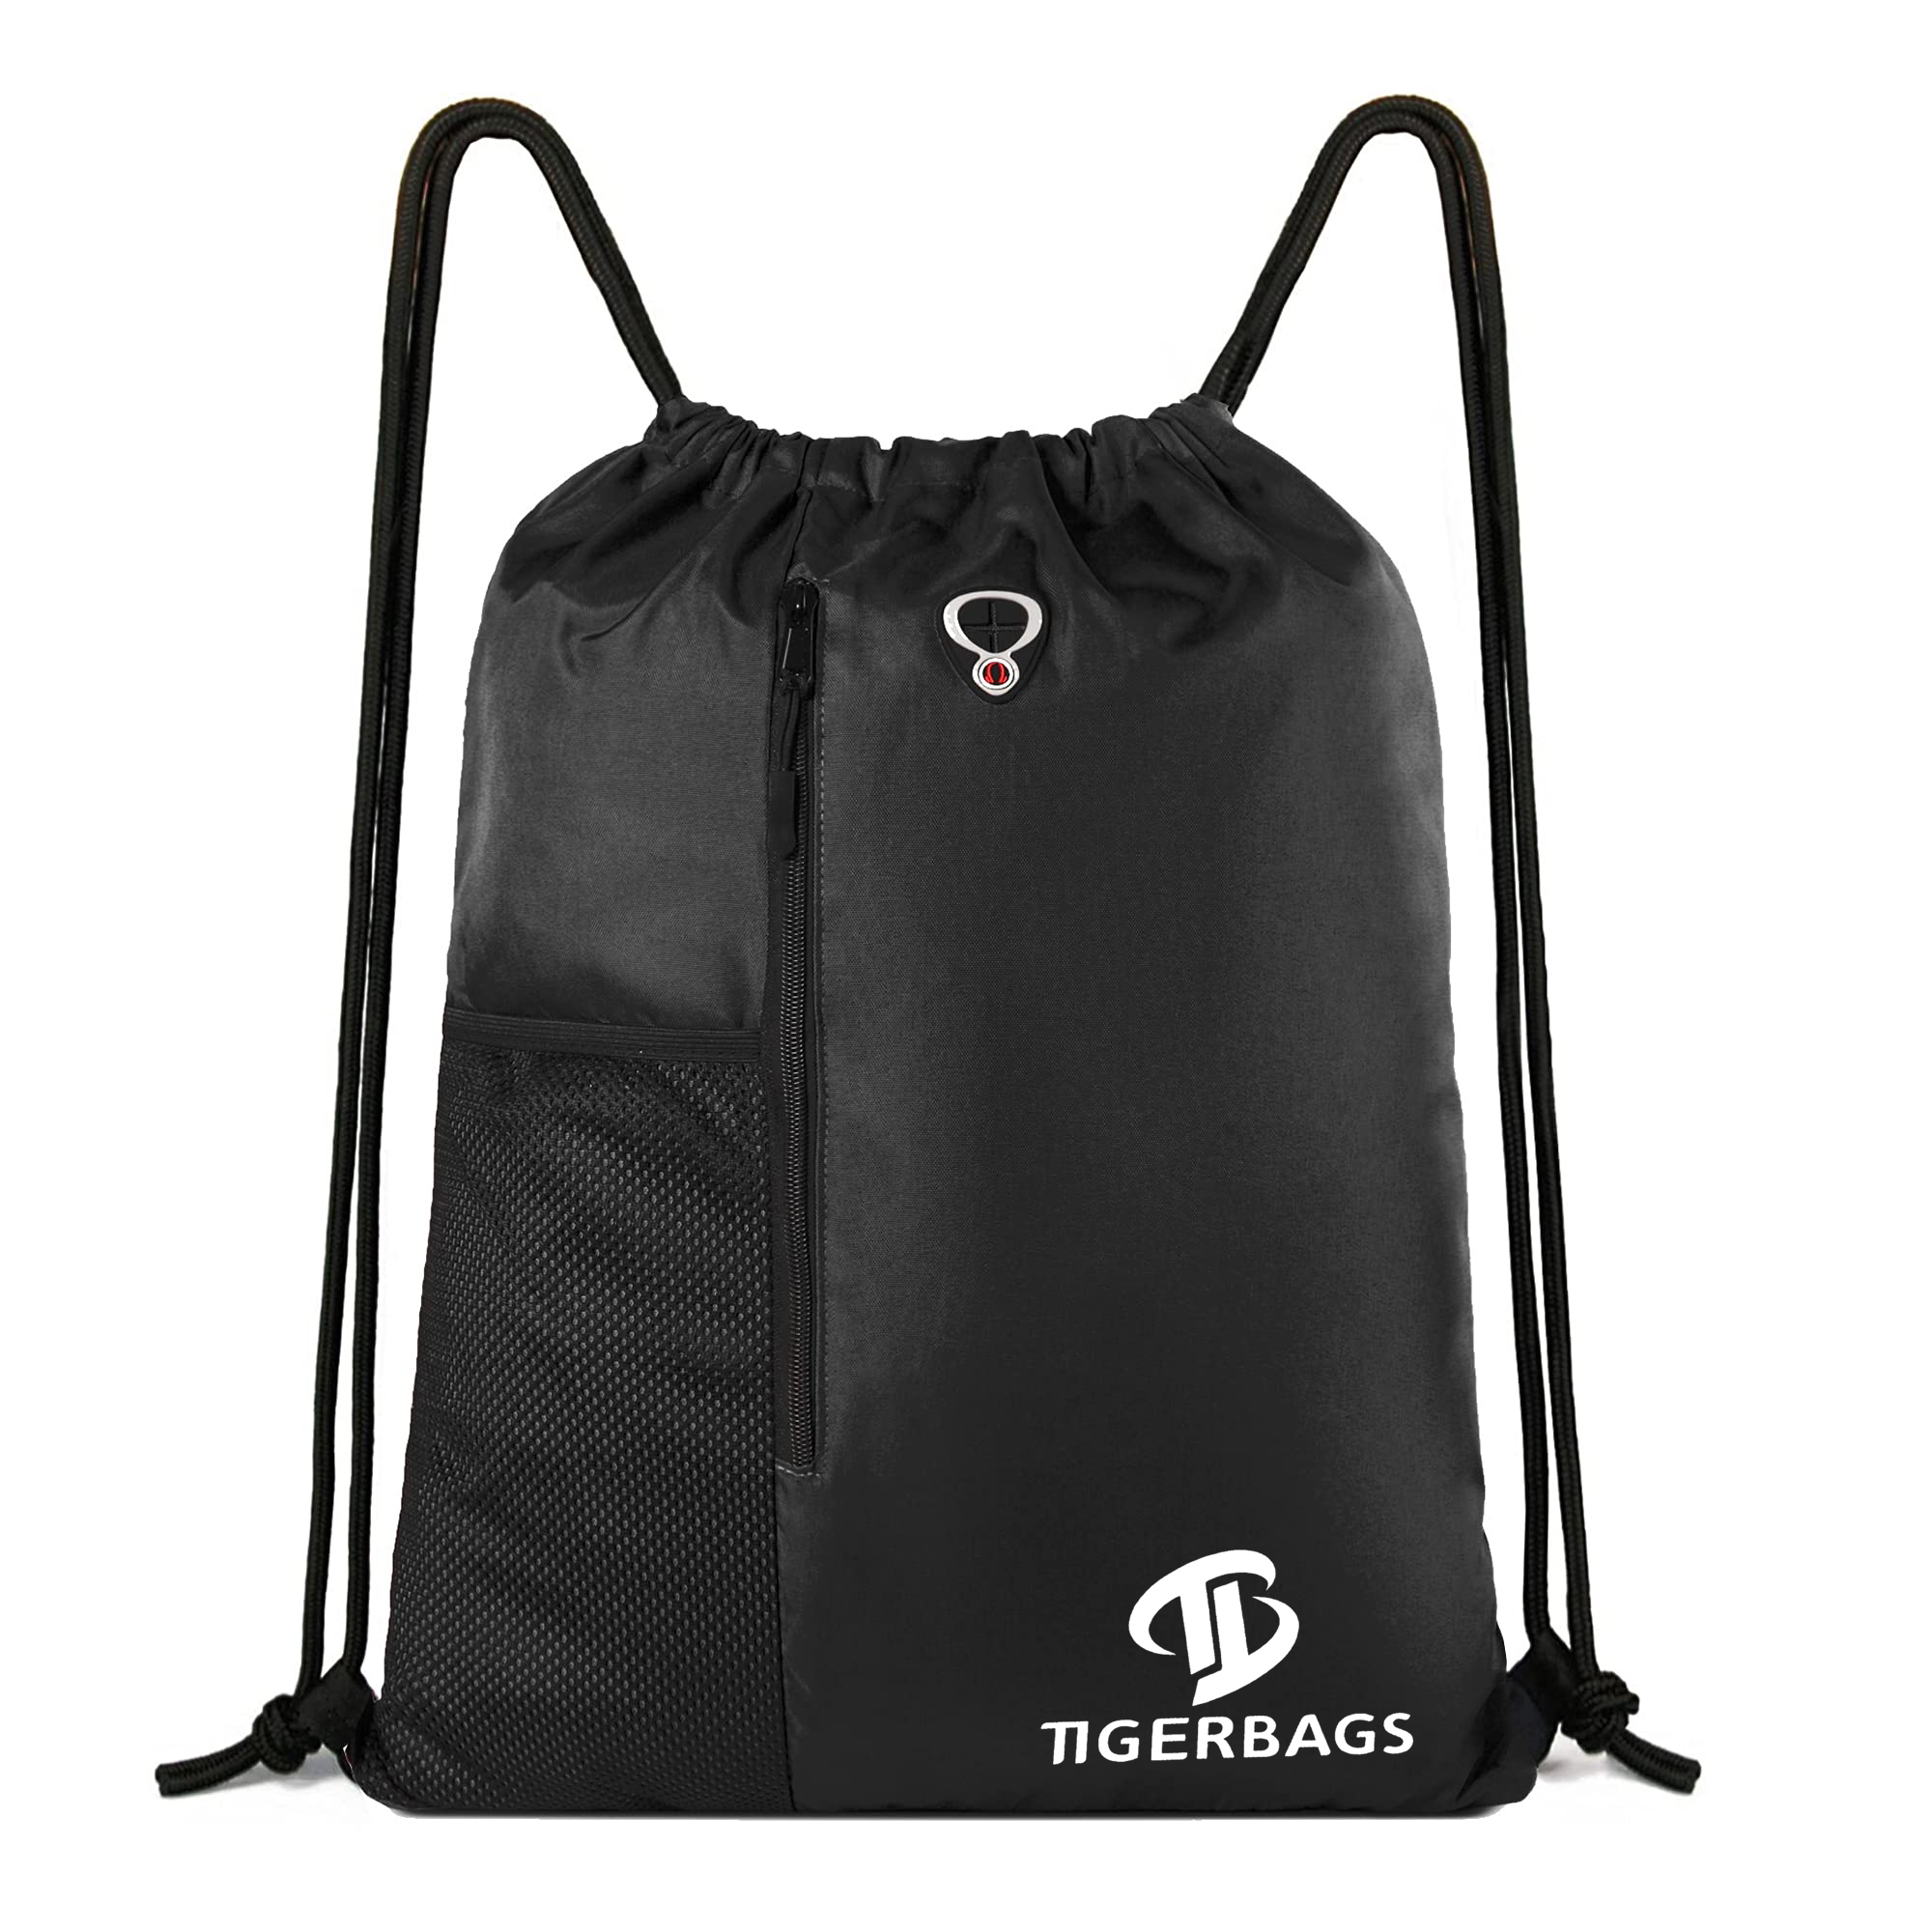 Drawstring backpack Sports and fitness bag for men and women